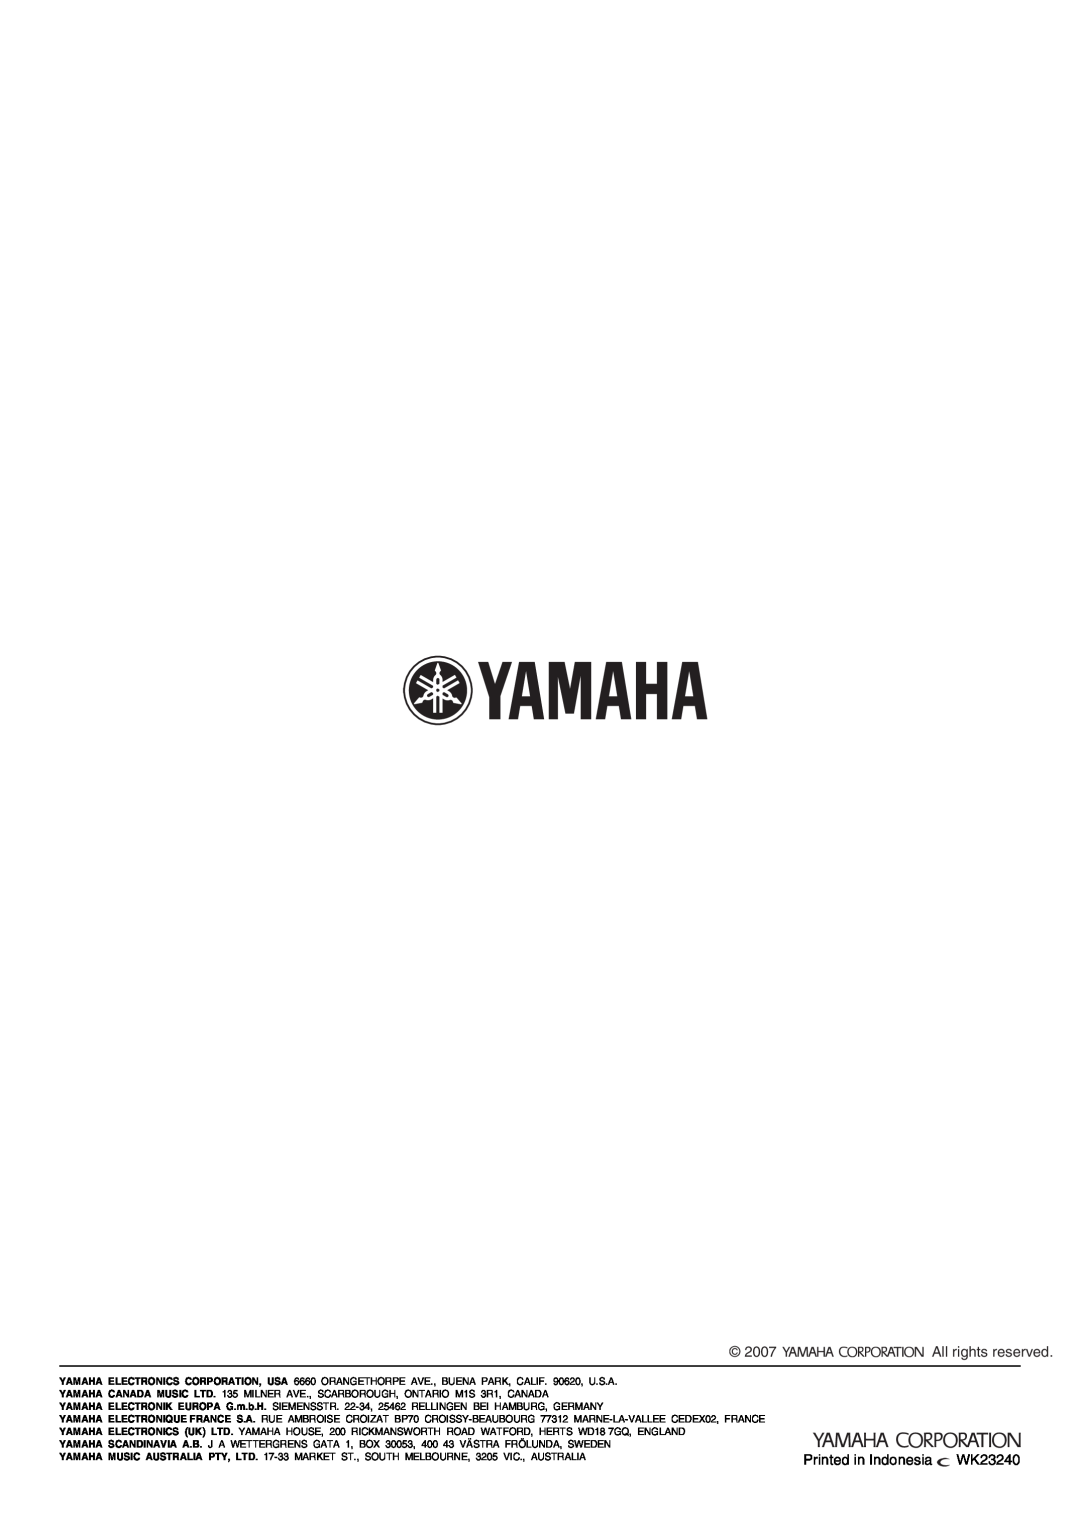 Yamaha YST-RSW300 owner manual 2007, WK23240, All rights reserved 